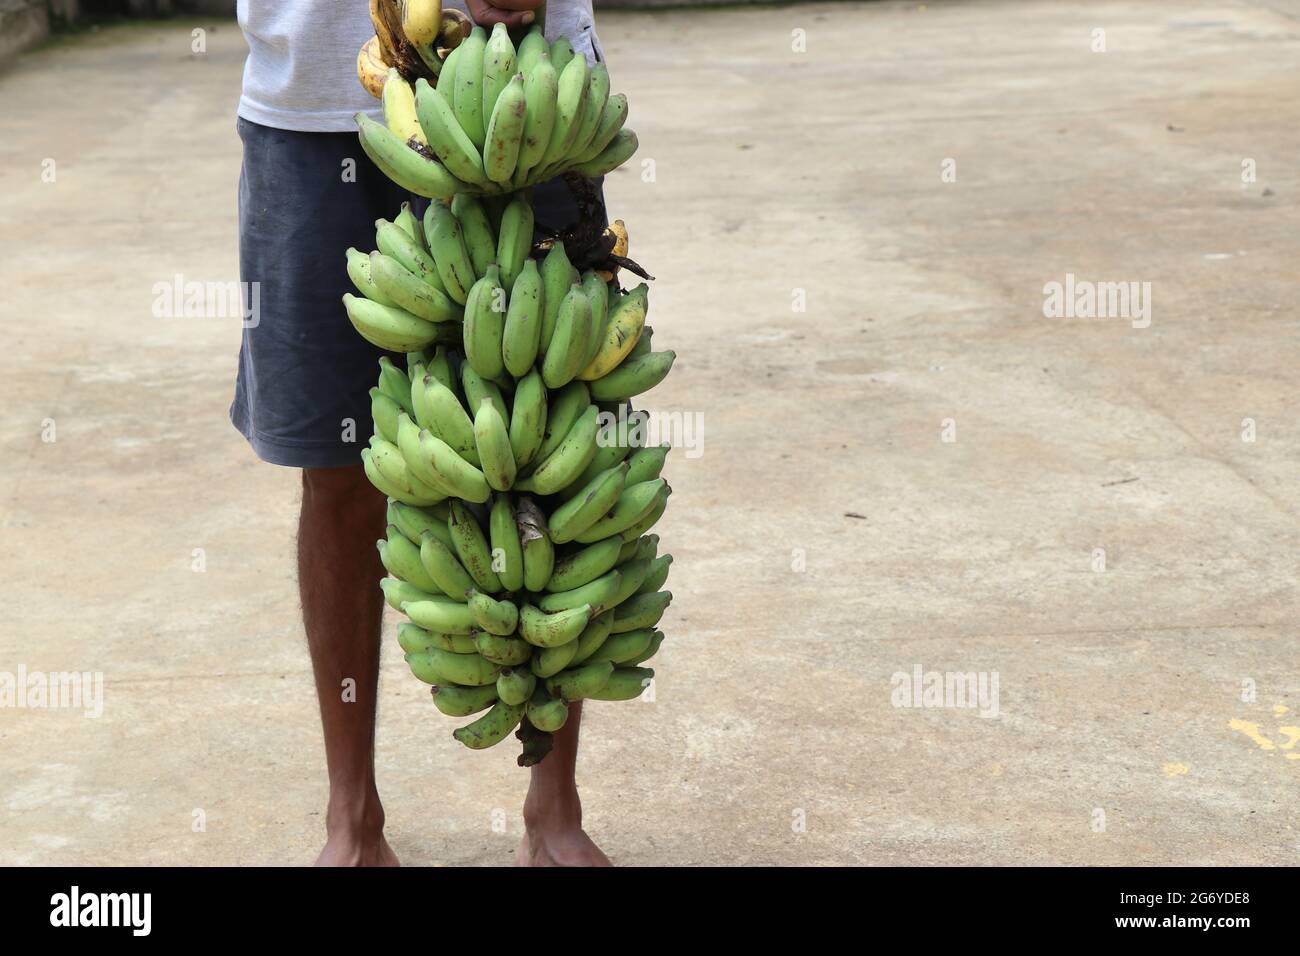 Long banana bunch which contains ripe and unripe or green and yellow bananas lift by hand to measure height of bunch Stock Photo